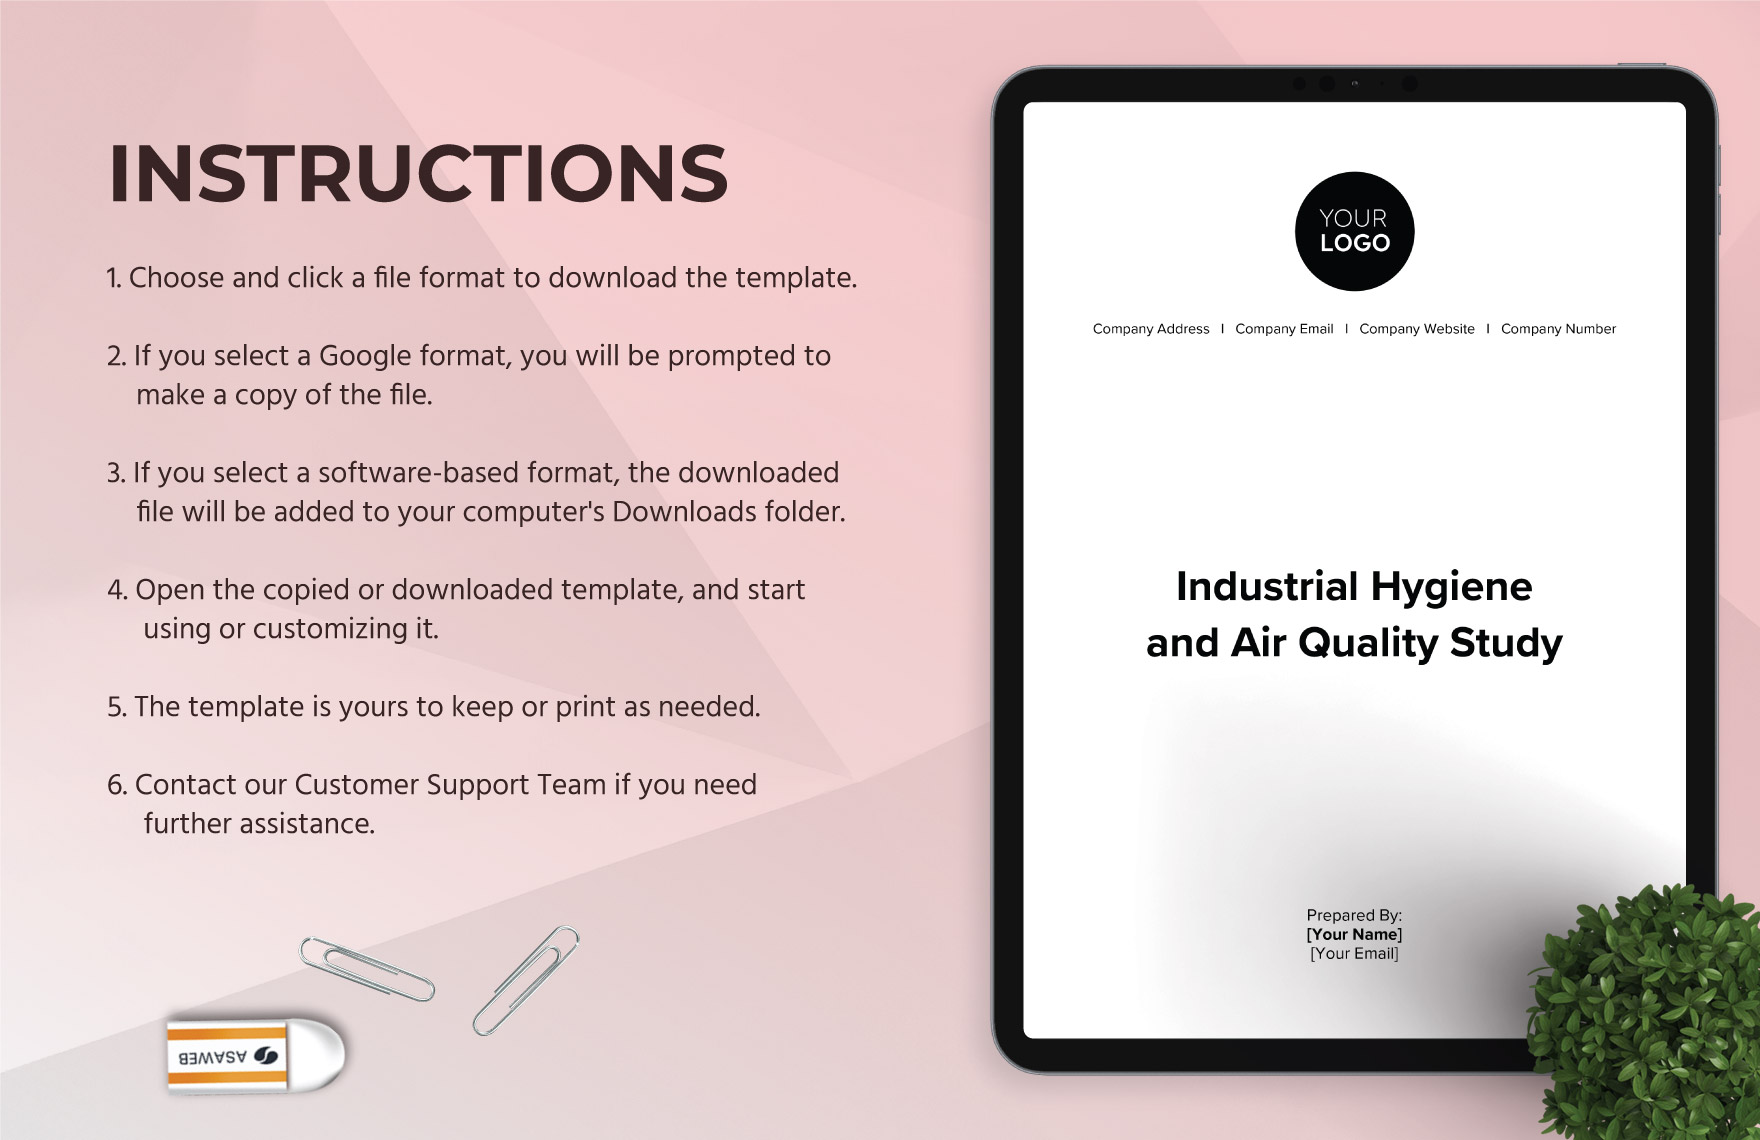 Industrial Hygiene and Air Quality Study HR Template